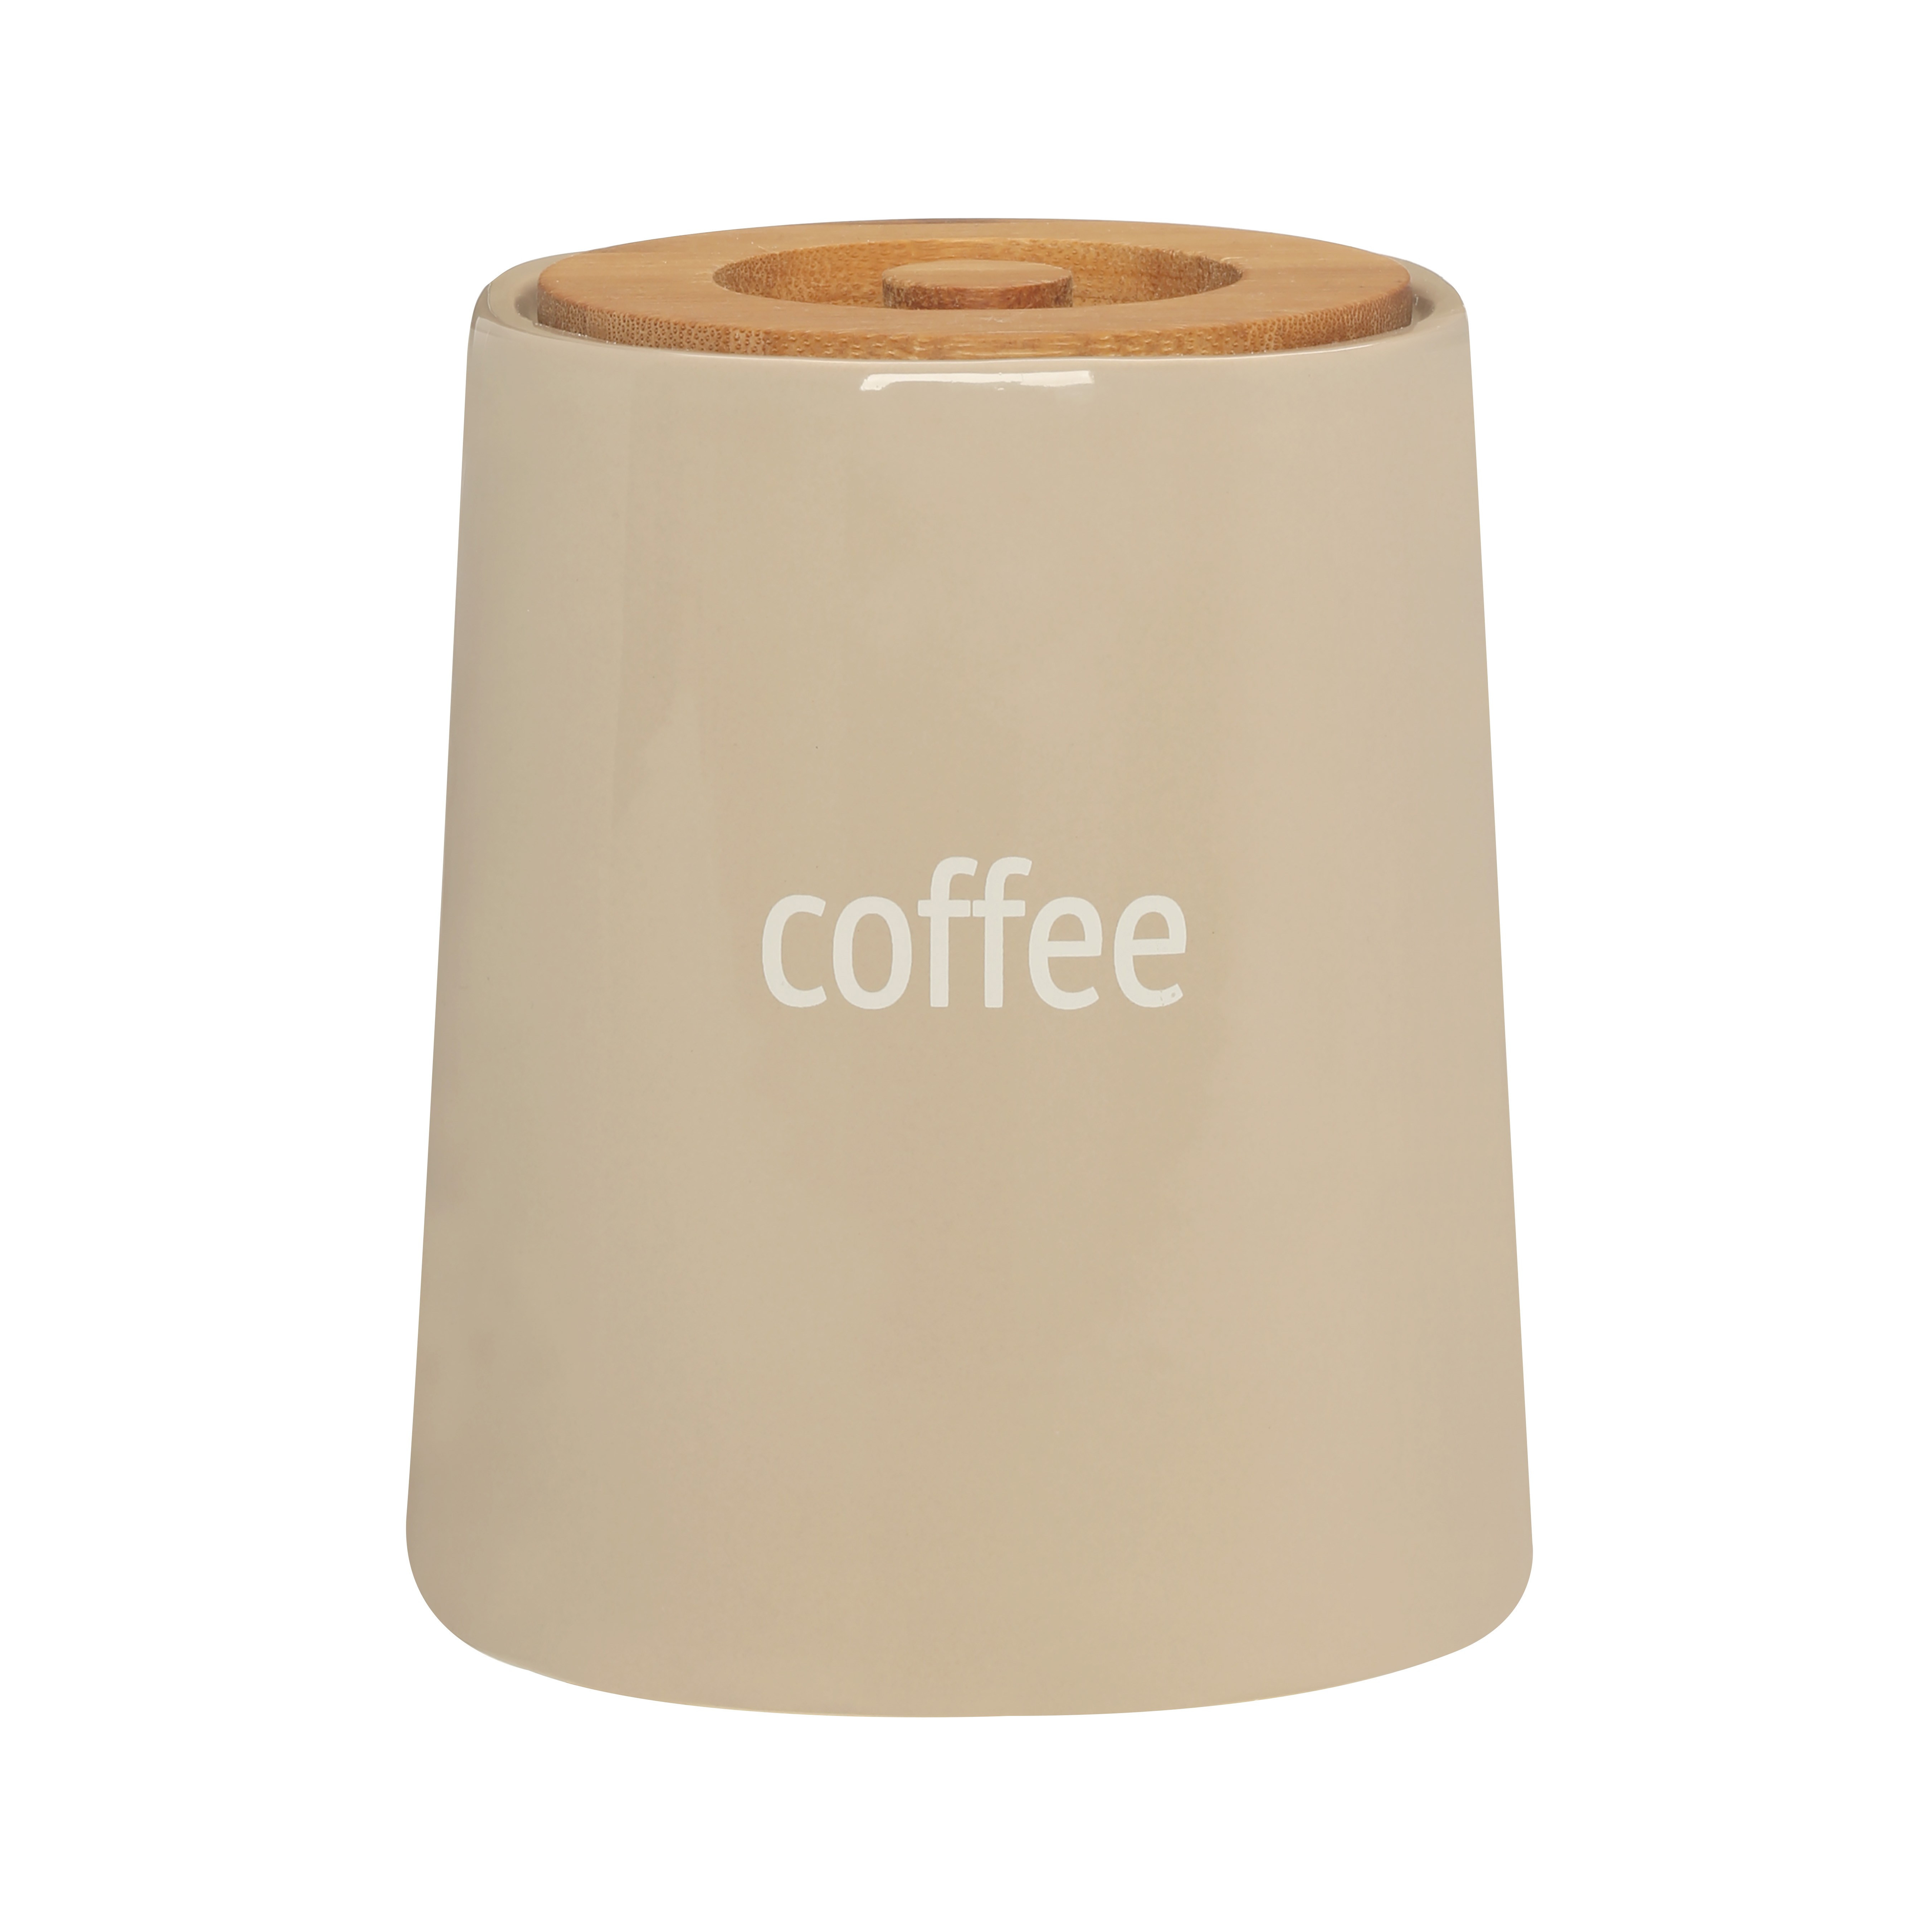 Fletcher Coffee Canister Beige Ceramic - Bamboo Lid